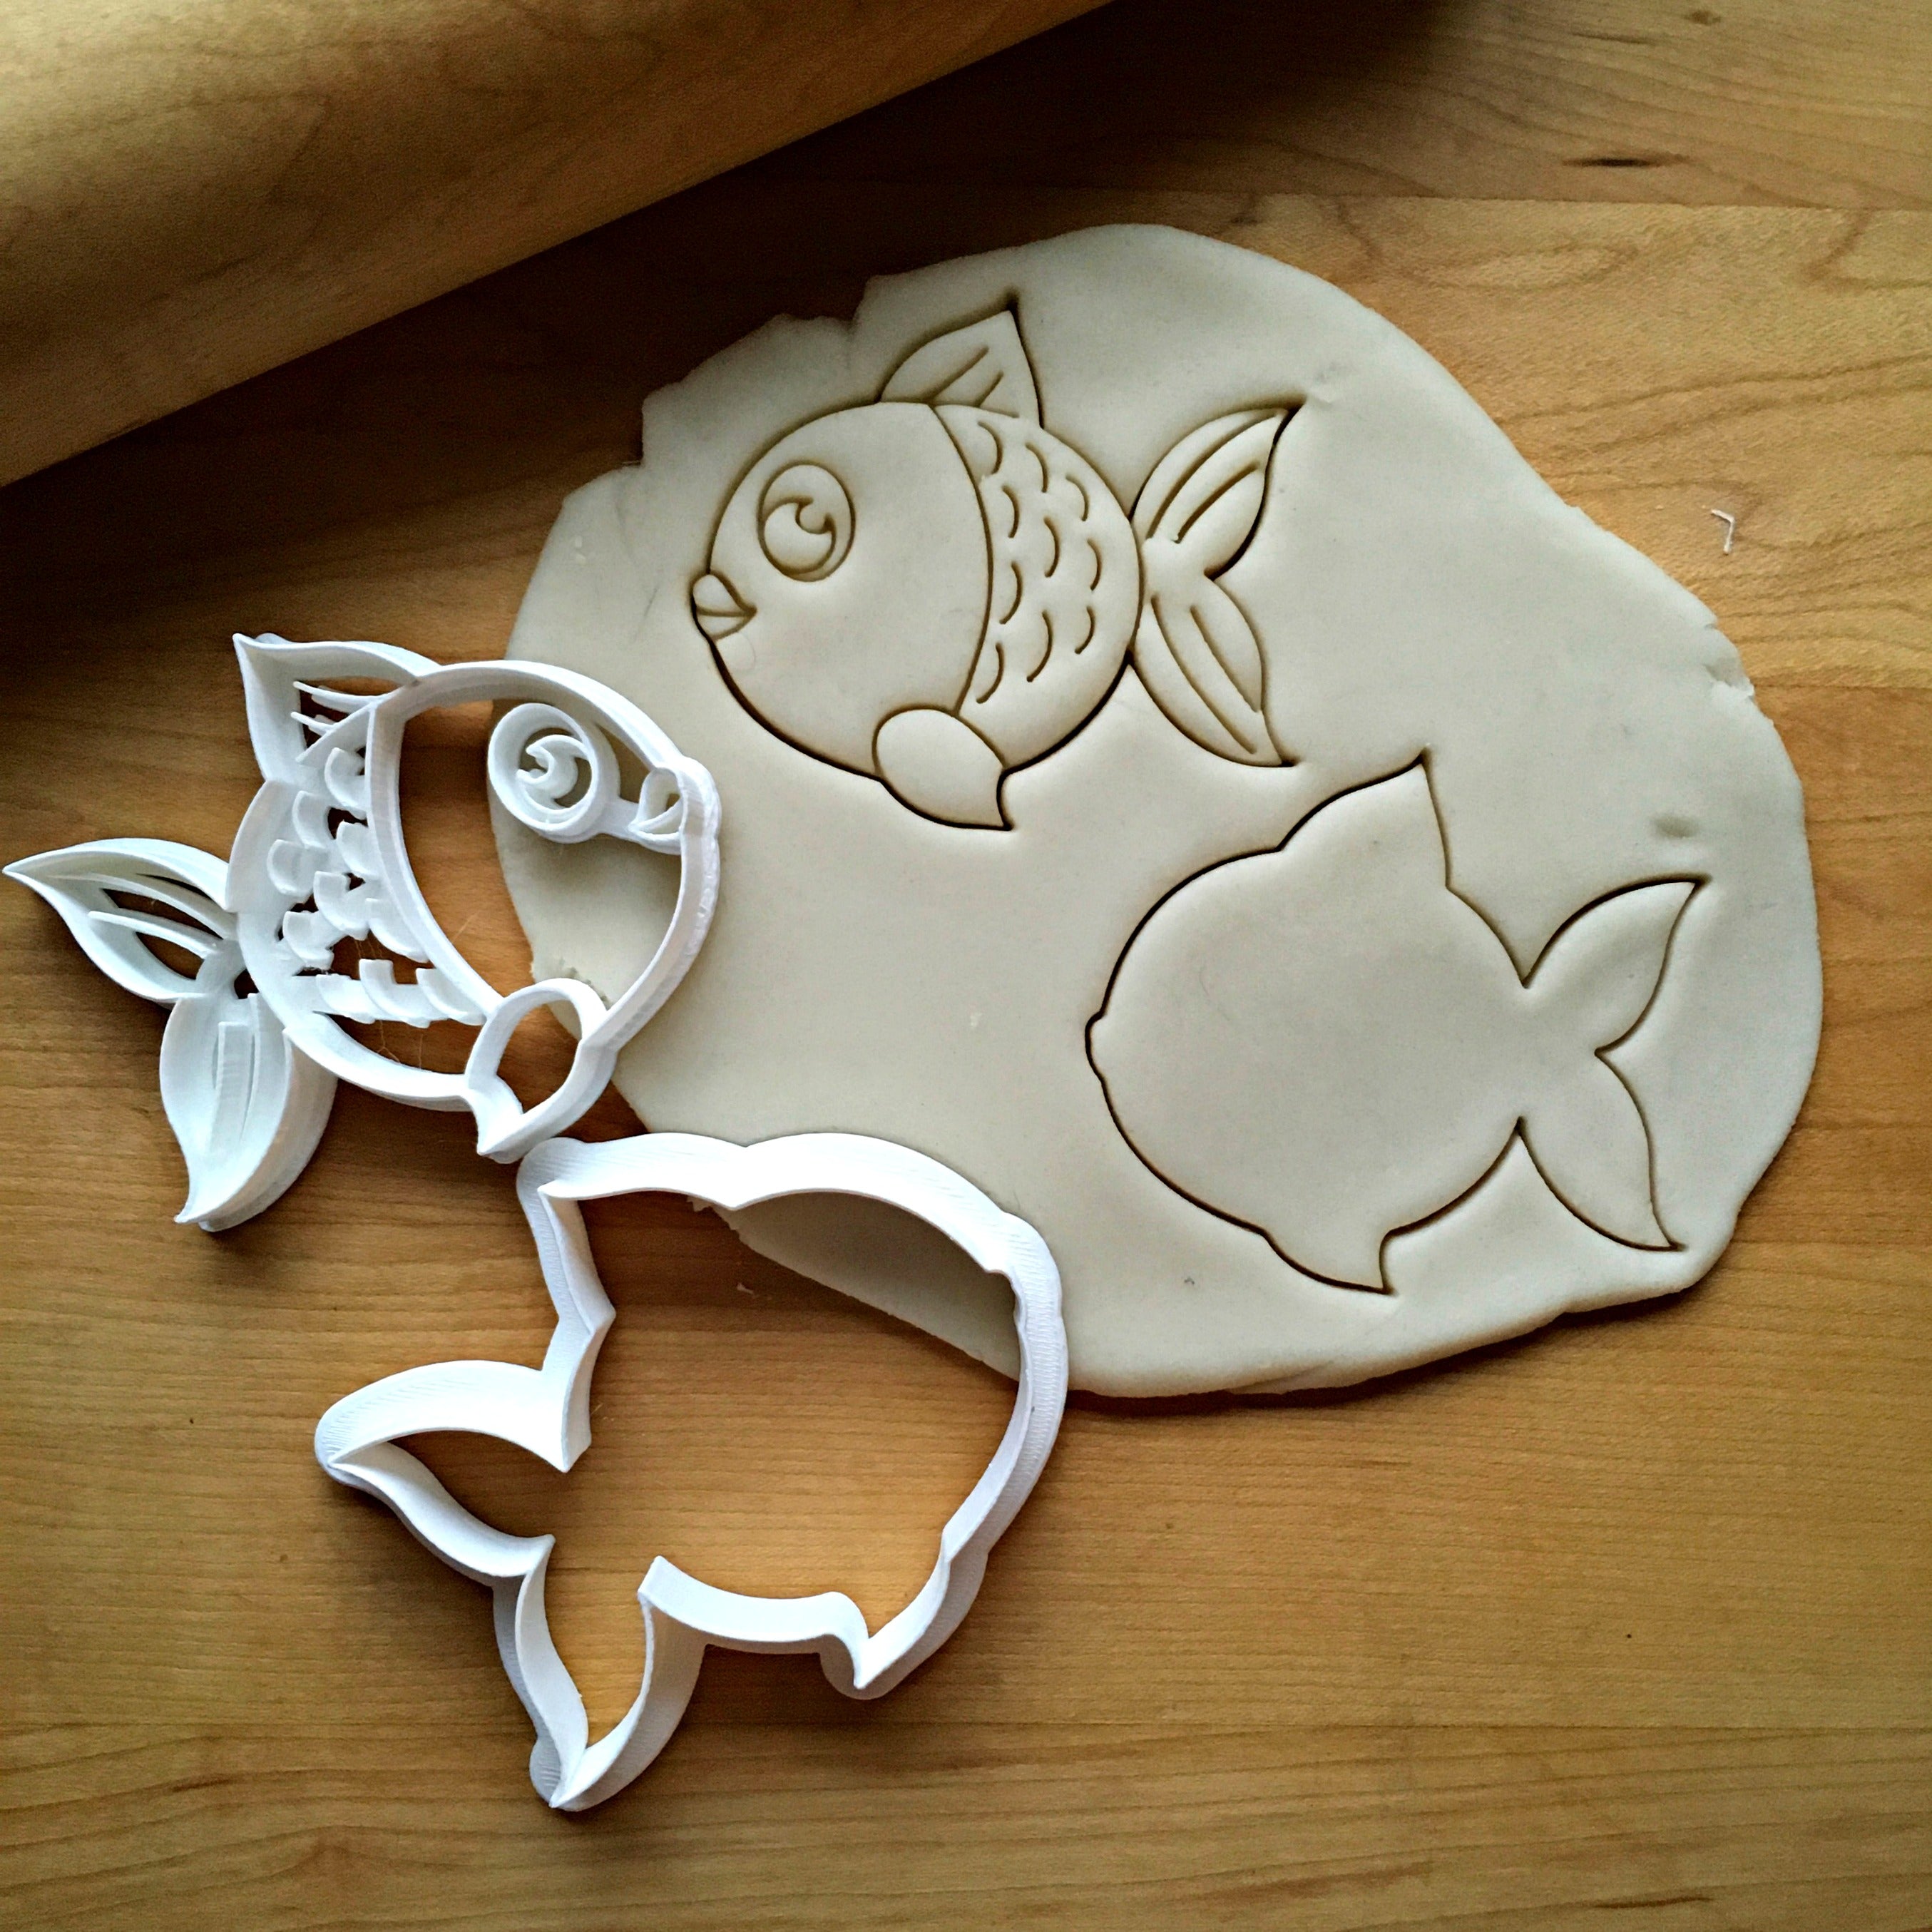 Set of 2 Fish Cookie Cutters/Dishwasher Safe